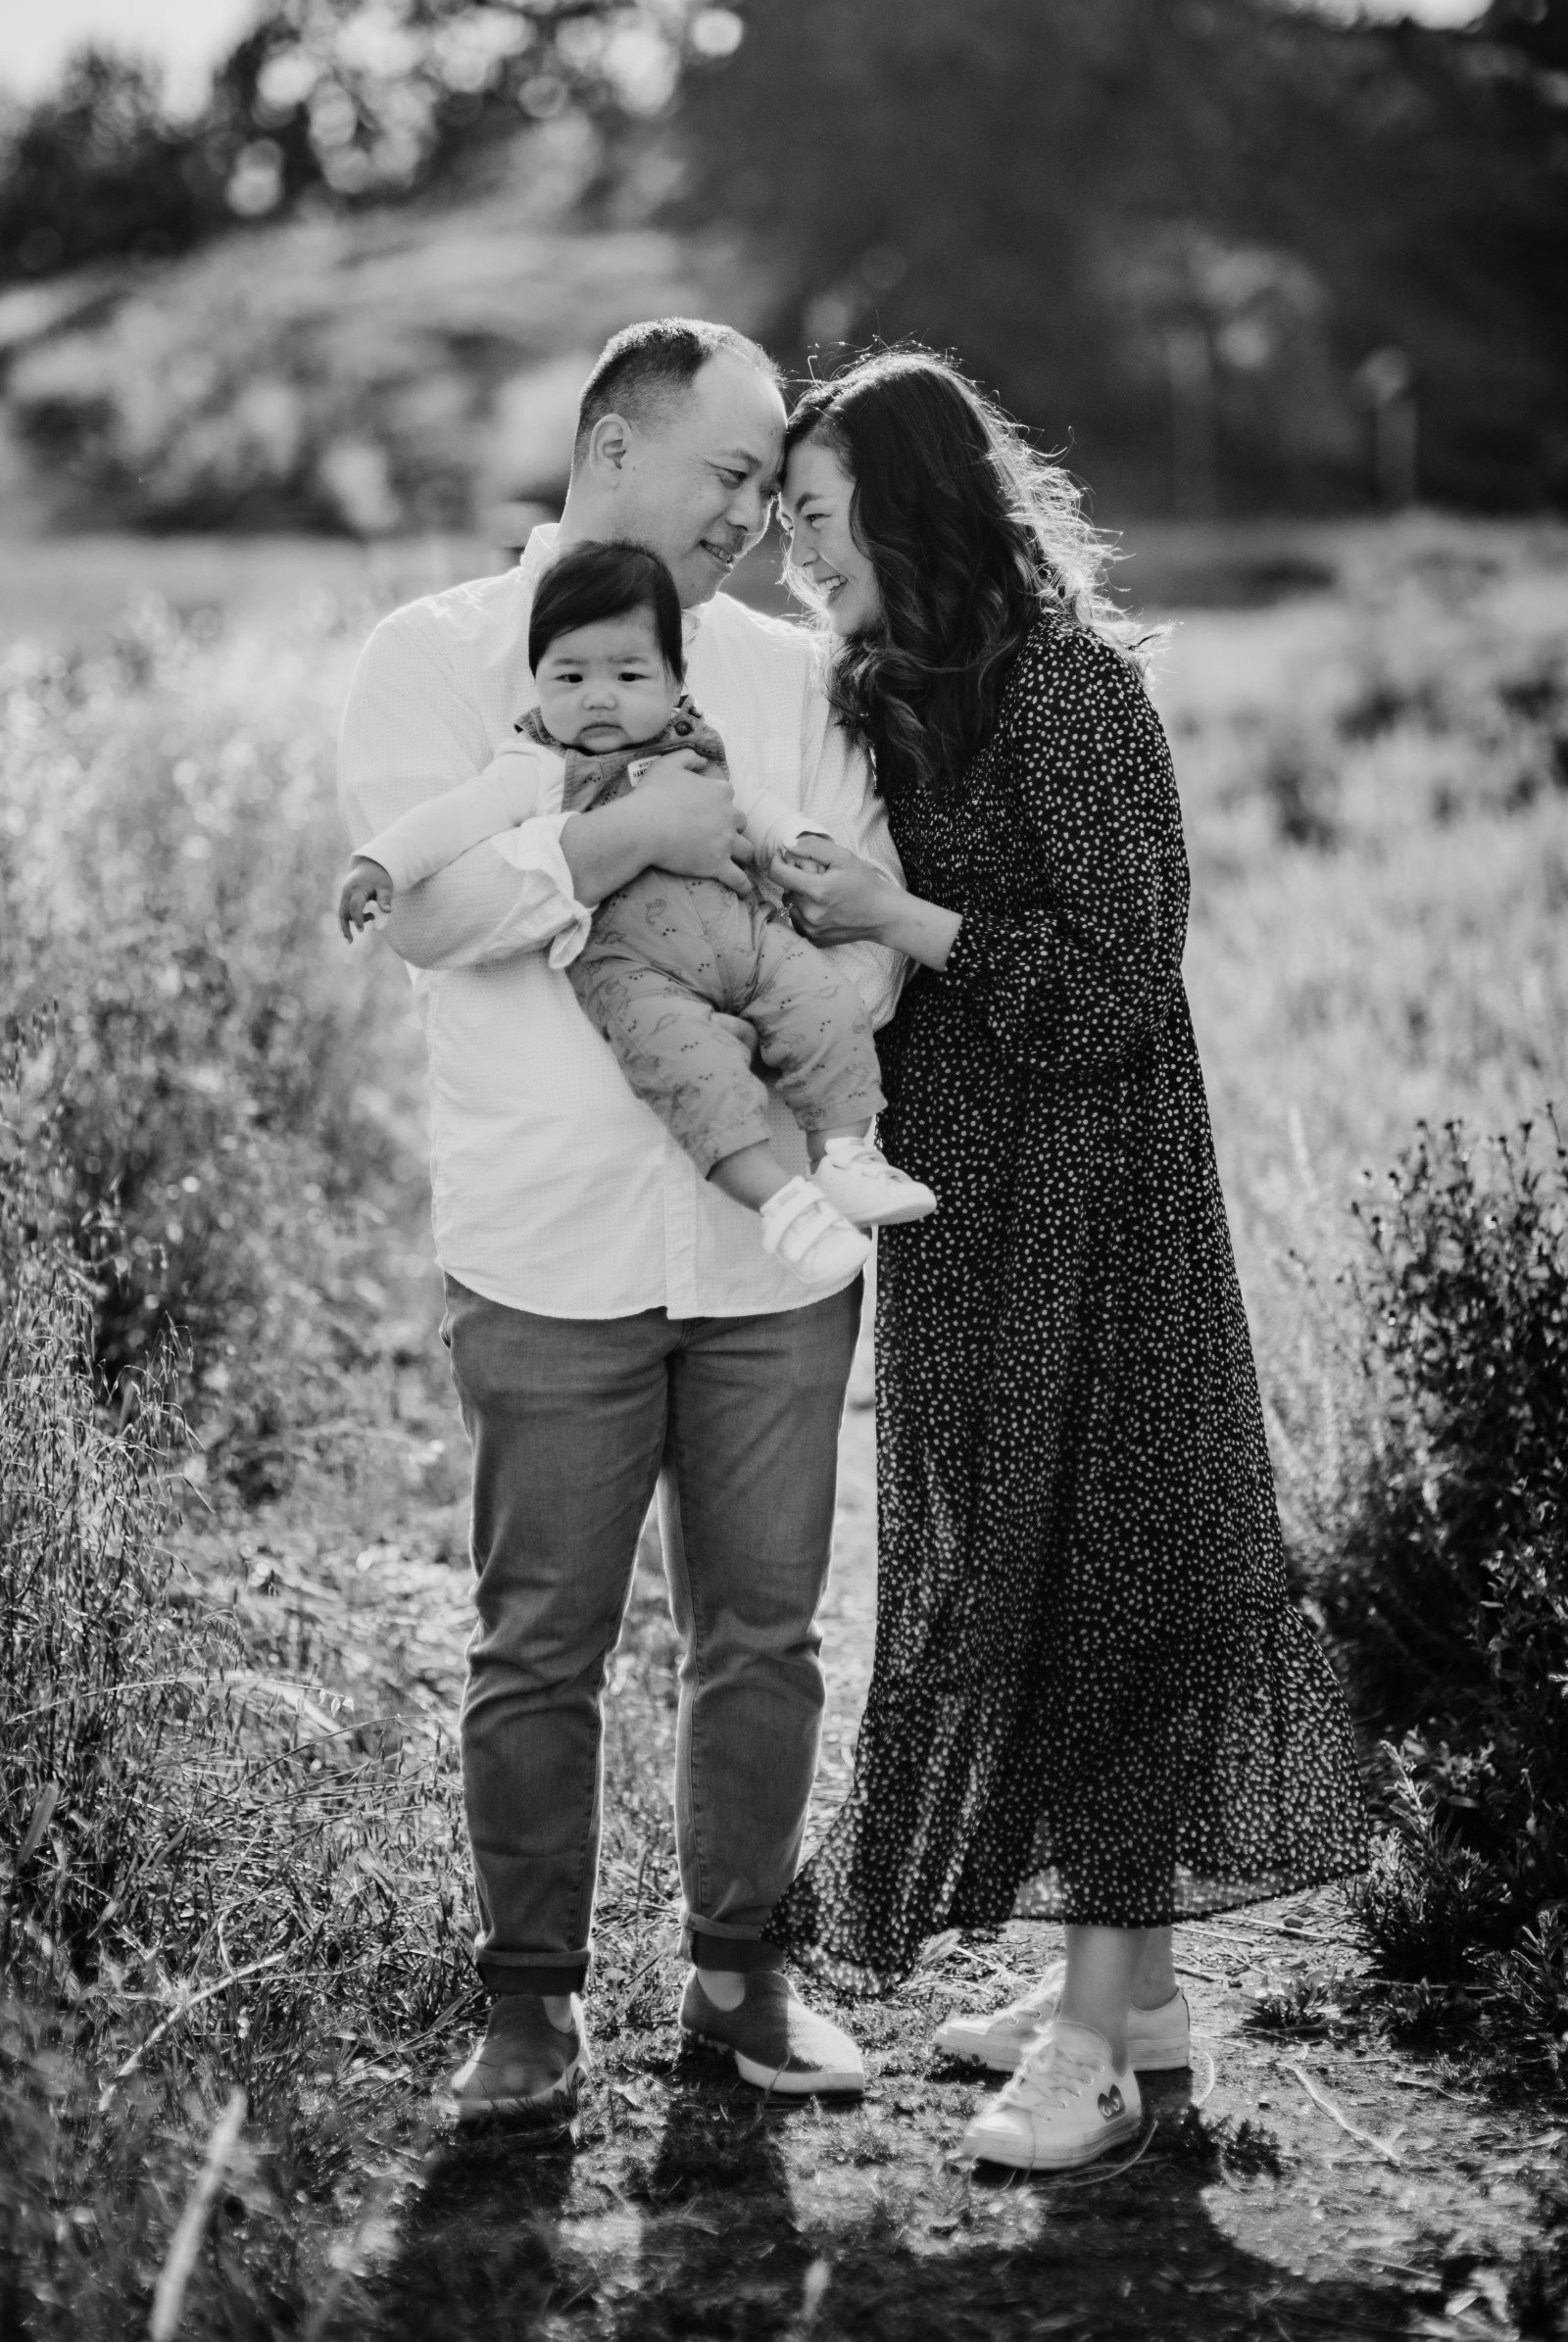 EAST BAY AREA FAMILY PHOTOGRAPHY SHELL RIDGE OPEN SPACE BABY LIFESTYLE PHOTOSHOOT  7.jpg